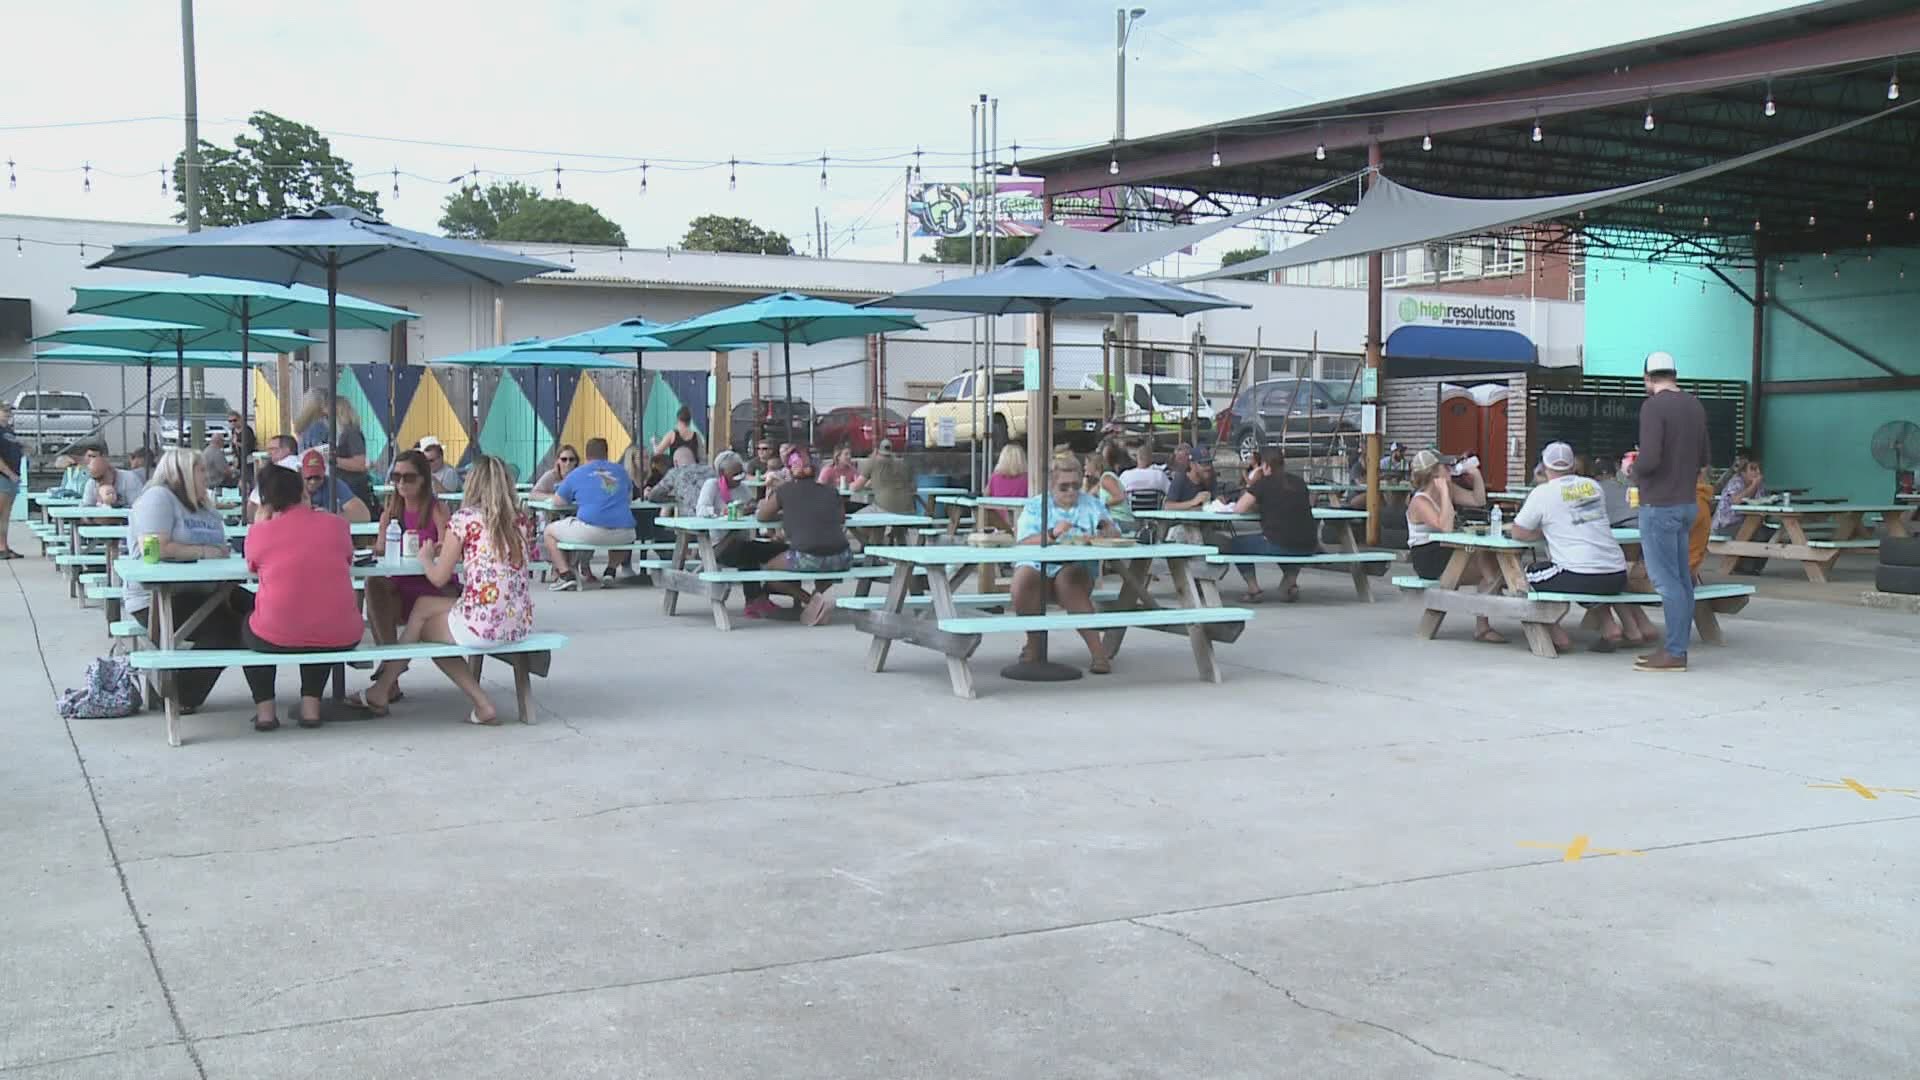 The Knoxville food truck park hosted six trucks. 
Tables were separated for social distancing and employees were cleaning as people came and went.